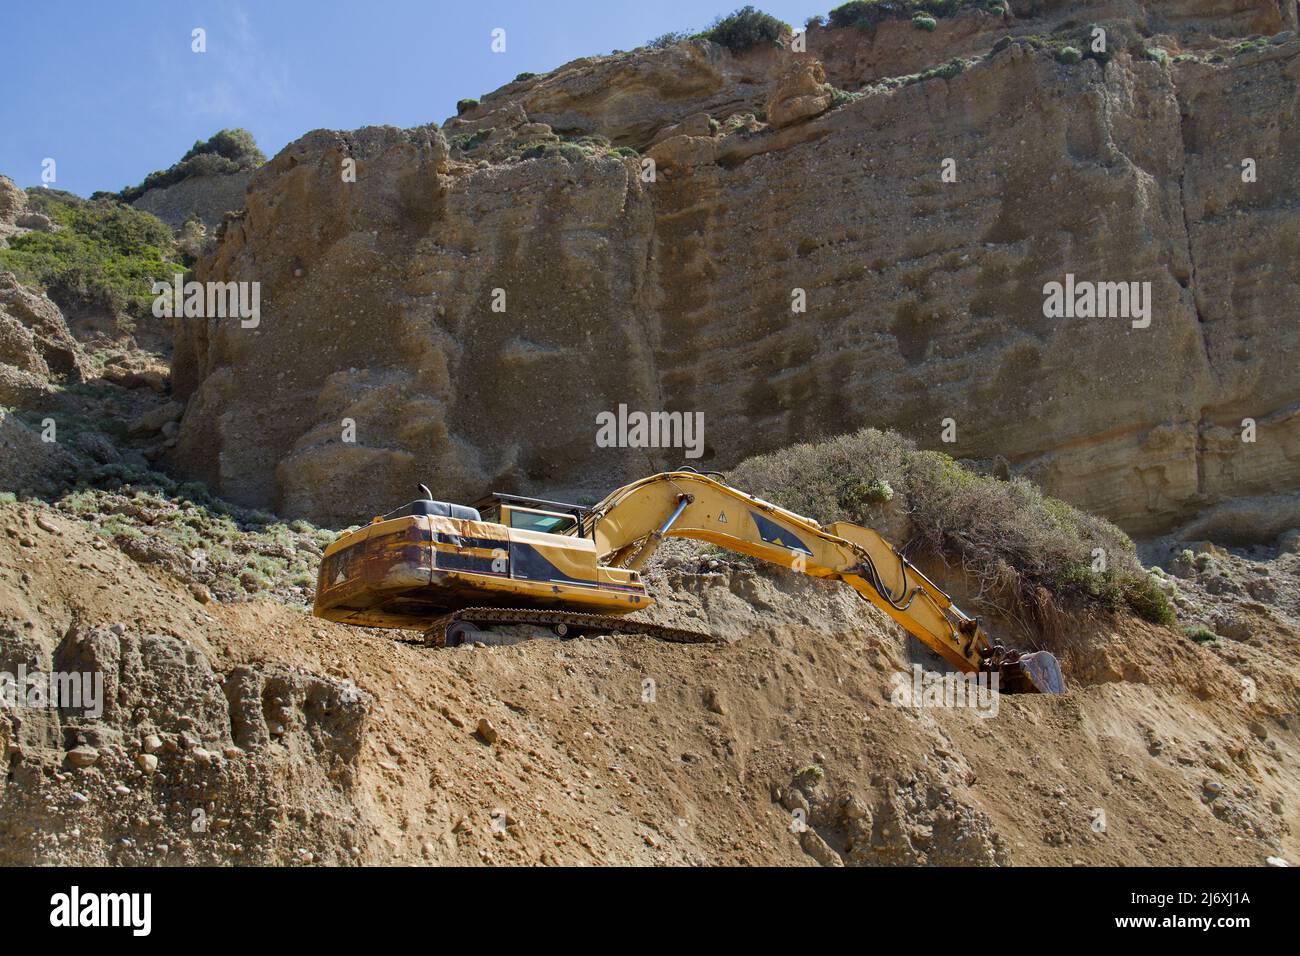 Yellow tracked excavator working on repairing a road in the mountains Stock Photo